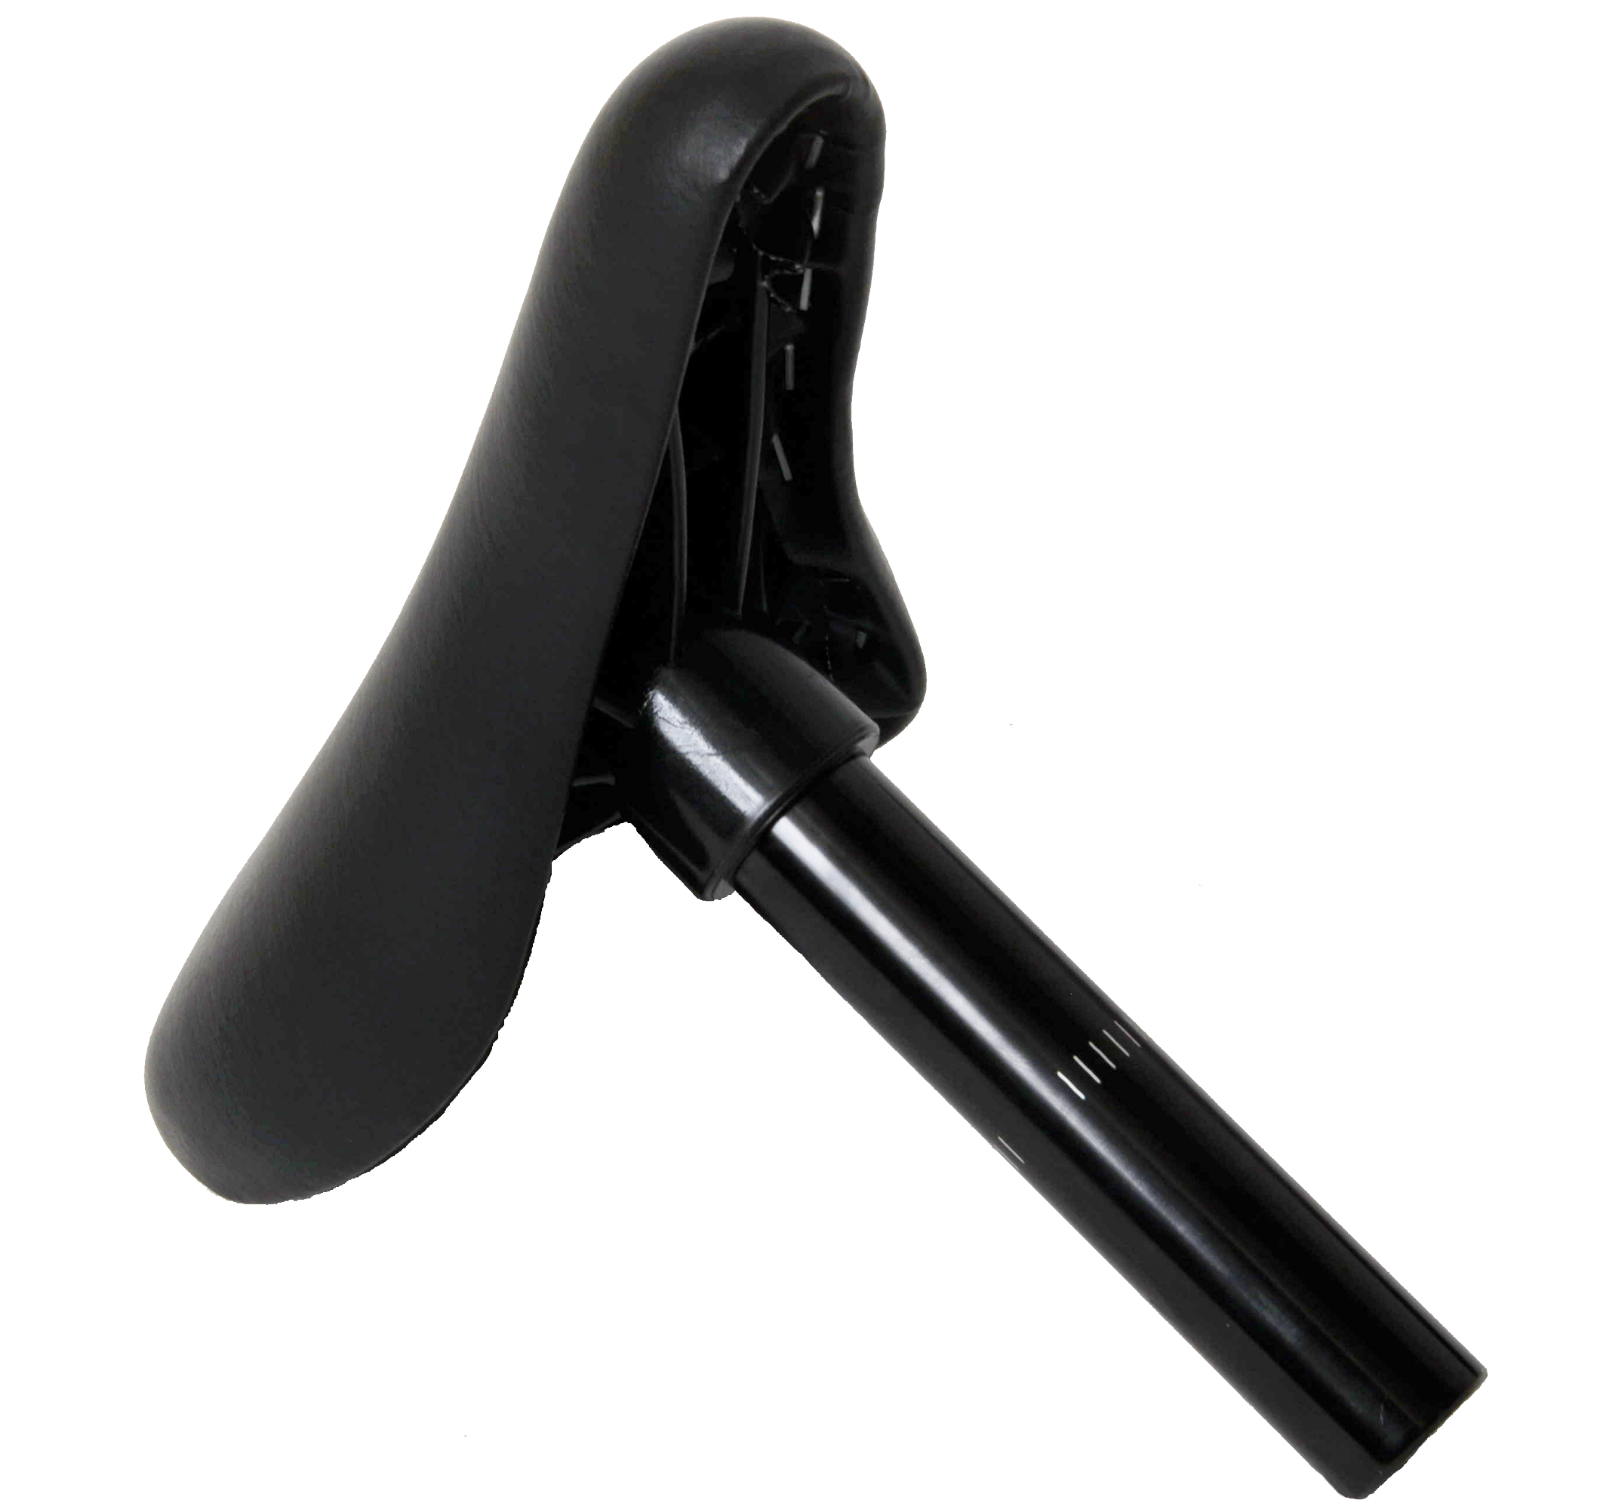 DK Conductor Two Piece Padded BMX Saddle With 25.4mm (1") Seatpost - Sportandleisure.com (6968090722458)